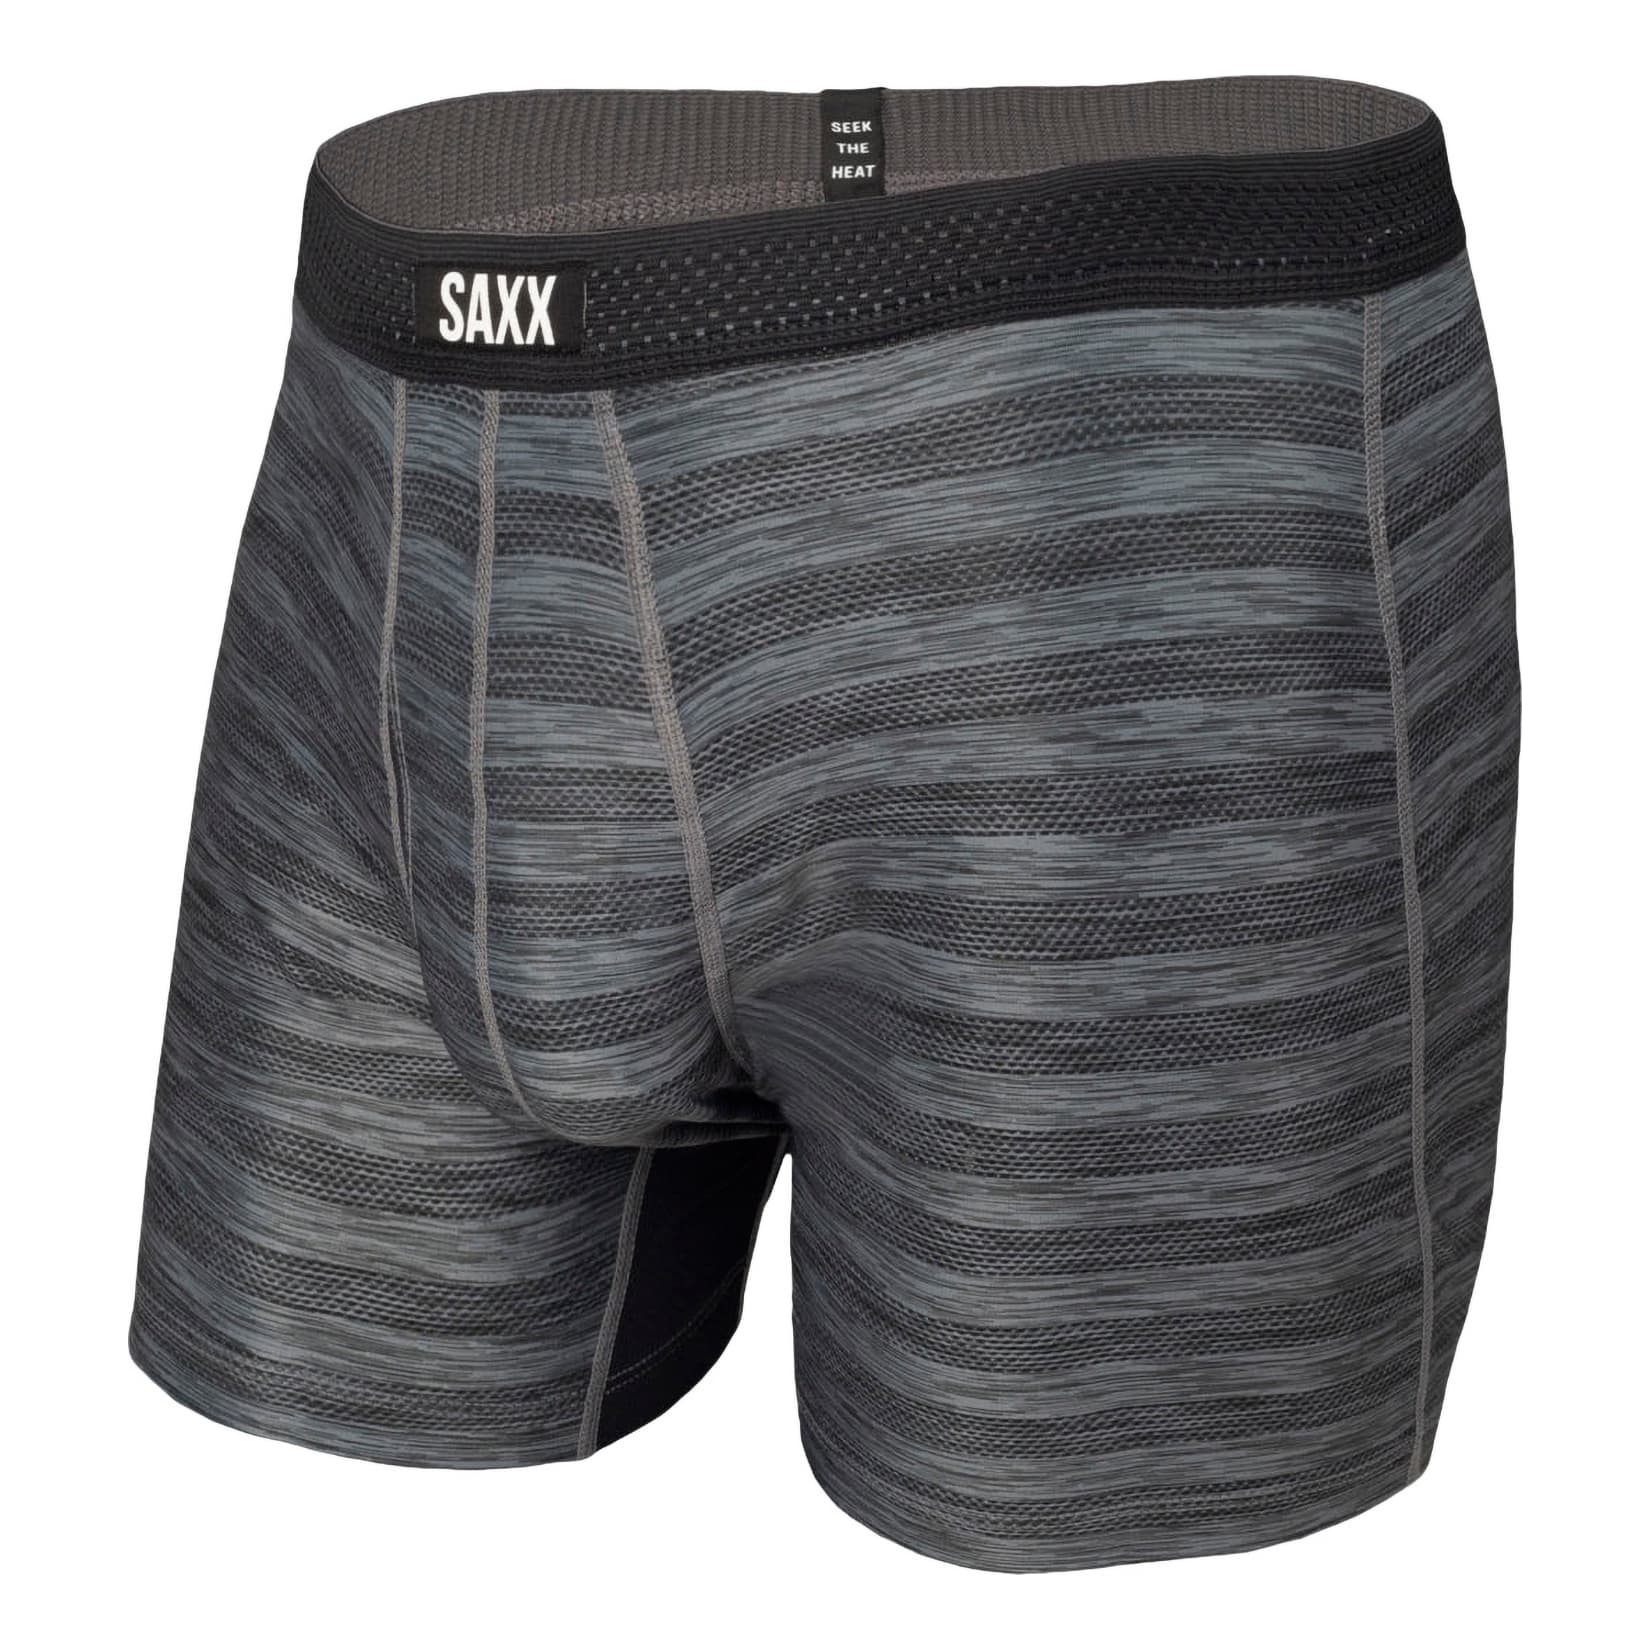 SAXX® Men's Undercover Boxer Brief with Fly